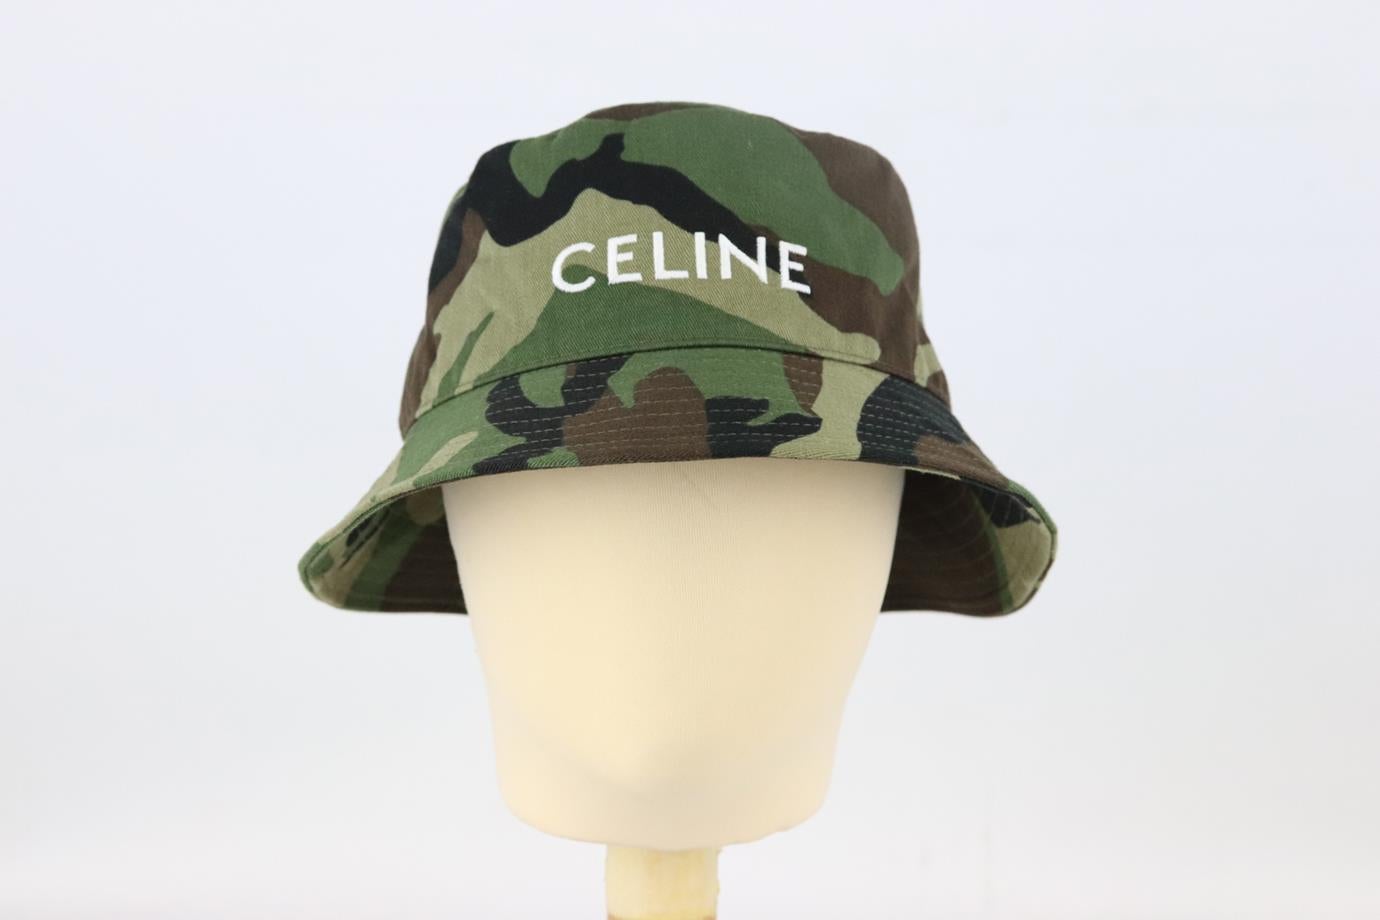 Celine logo embroidered camouflage print cotton twill bucket hat. Green, brown and black. Slips on. 100% Cotton; lining: 65% polyester, 35% cotton. Does not come with dustbag or box. Size: Medium (57 cm). Brim width: 2.2 in Very good condition -